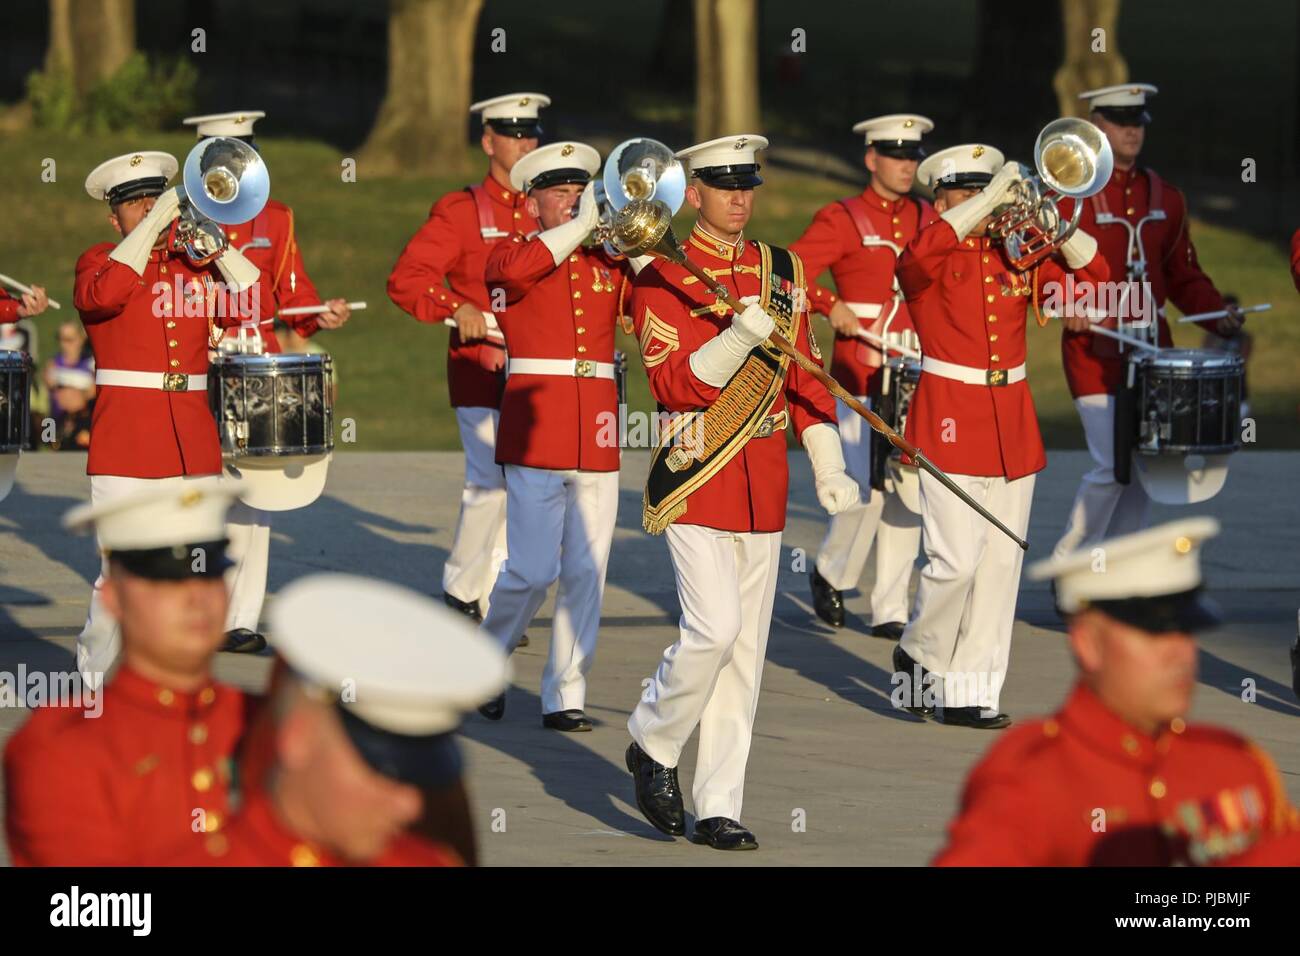 Marines with “The Commandant’s Own,” U.S. Marine Drum & Bugle Corps play a musical ballad during a Tuesday Sunset Parade at the Lincoln Memorial, Washington D.C., July 10, 2018. The guest of honor for the parade was the former Vice President of the U.S., Joe Biden, and the hosting official was the Staff Judge Advocate to the Commandant of the Marine Corps, Maj. Gen. John R. Ewers Jr. Stock Photo